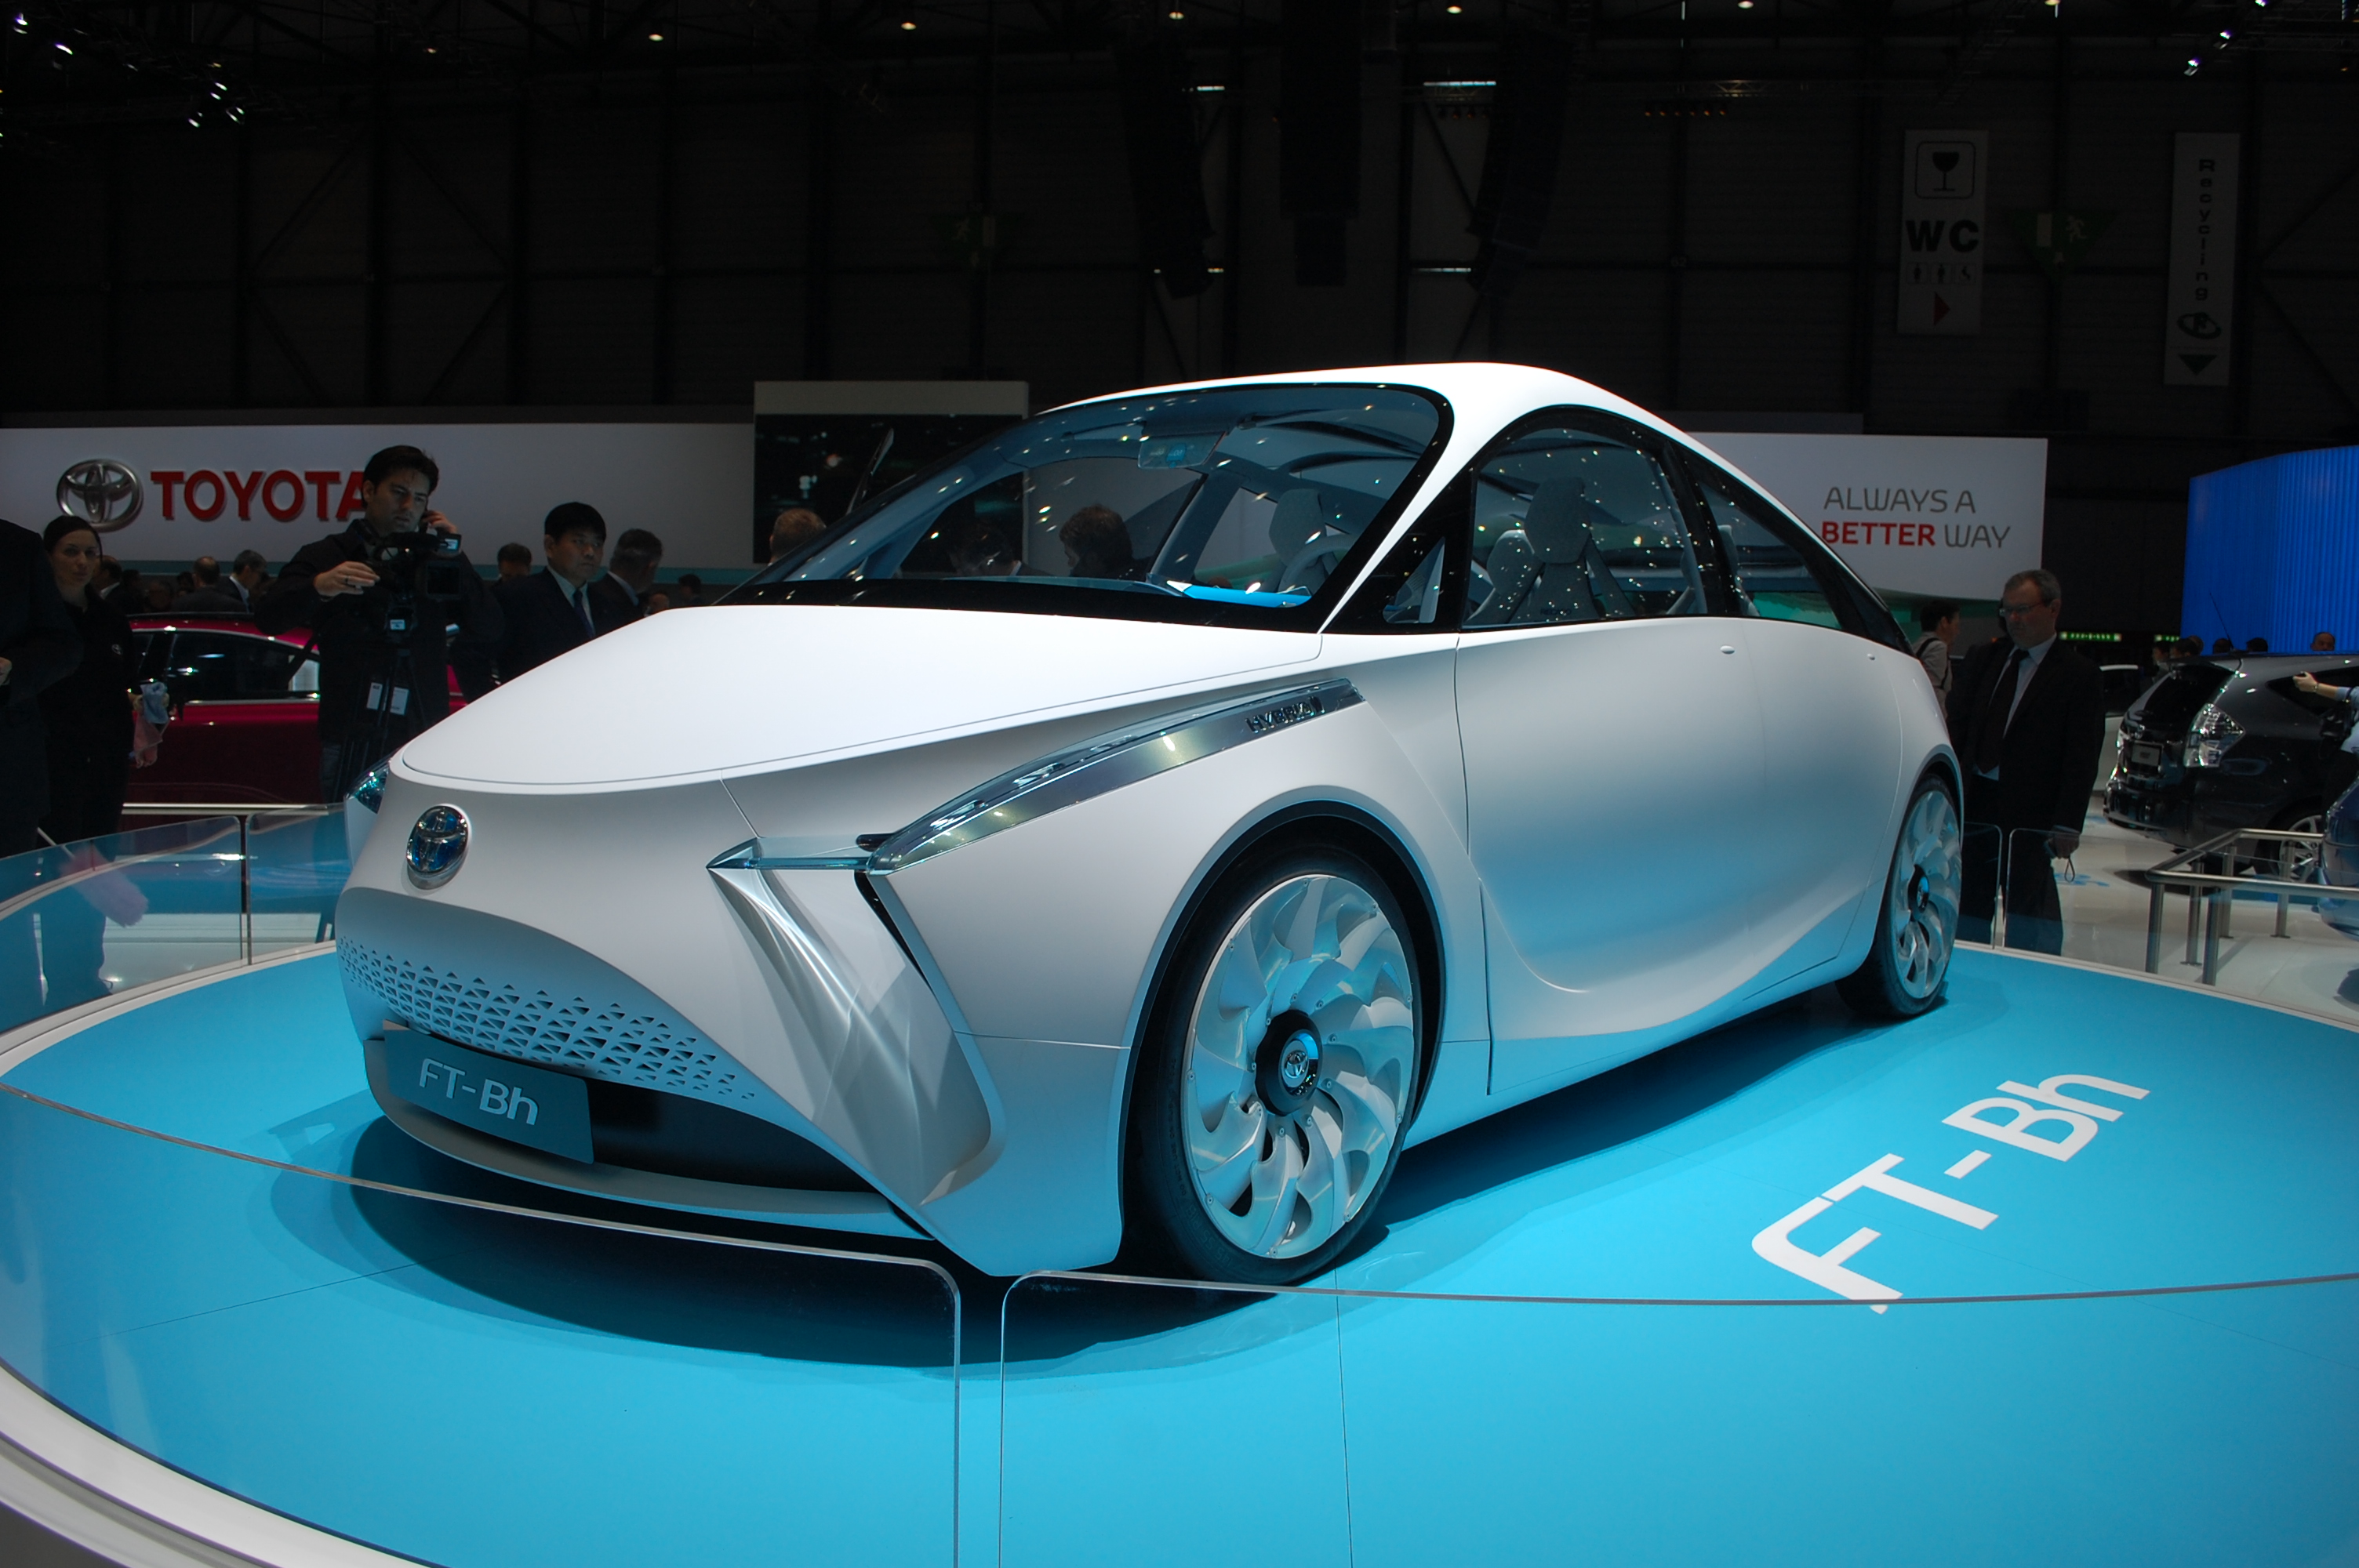 Five Hybrid Concept Cars We REALLY Want To Drive